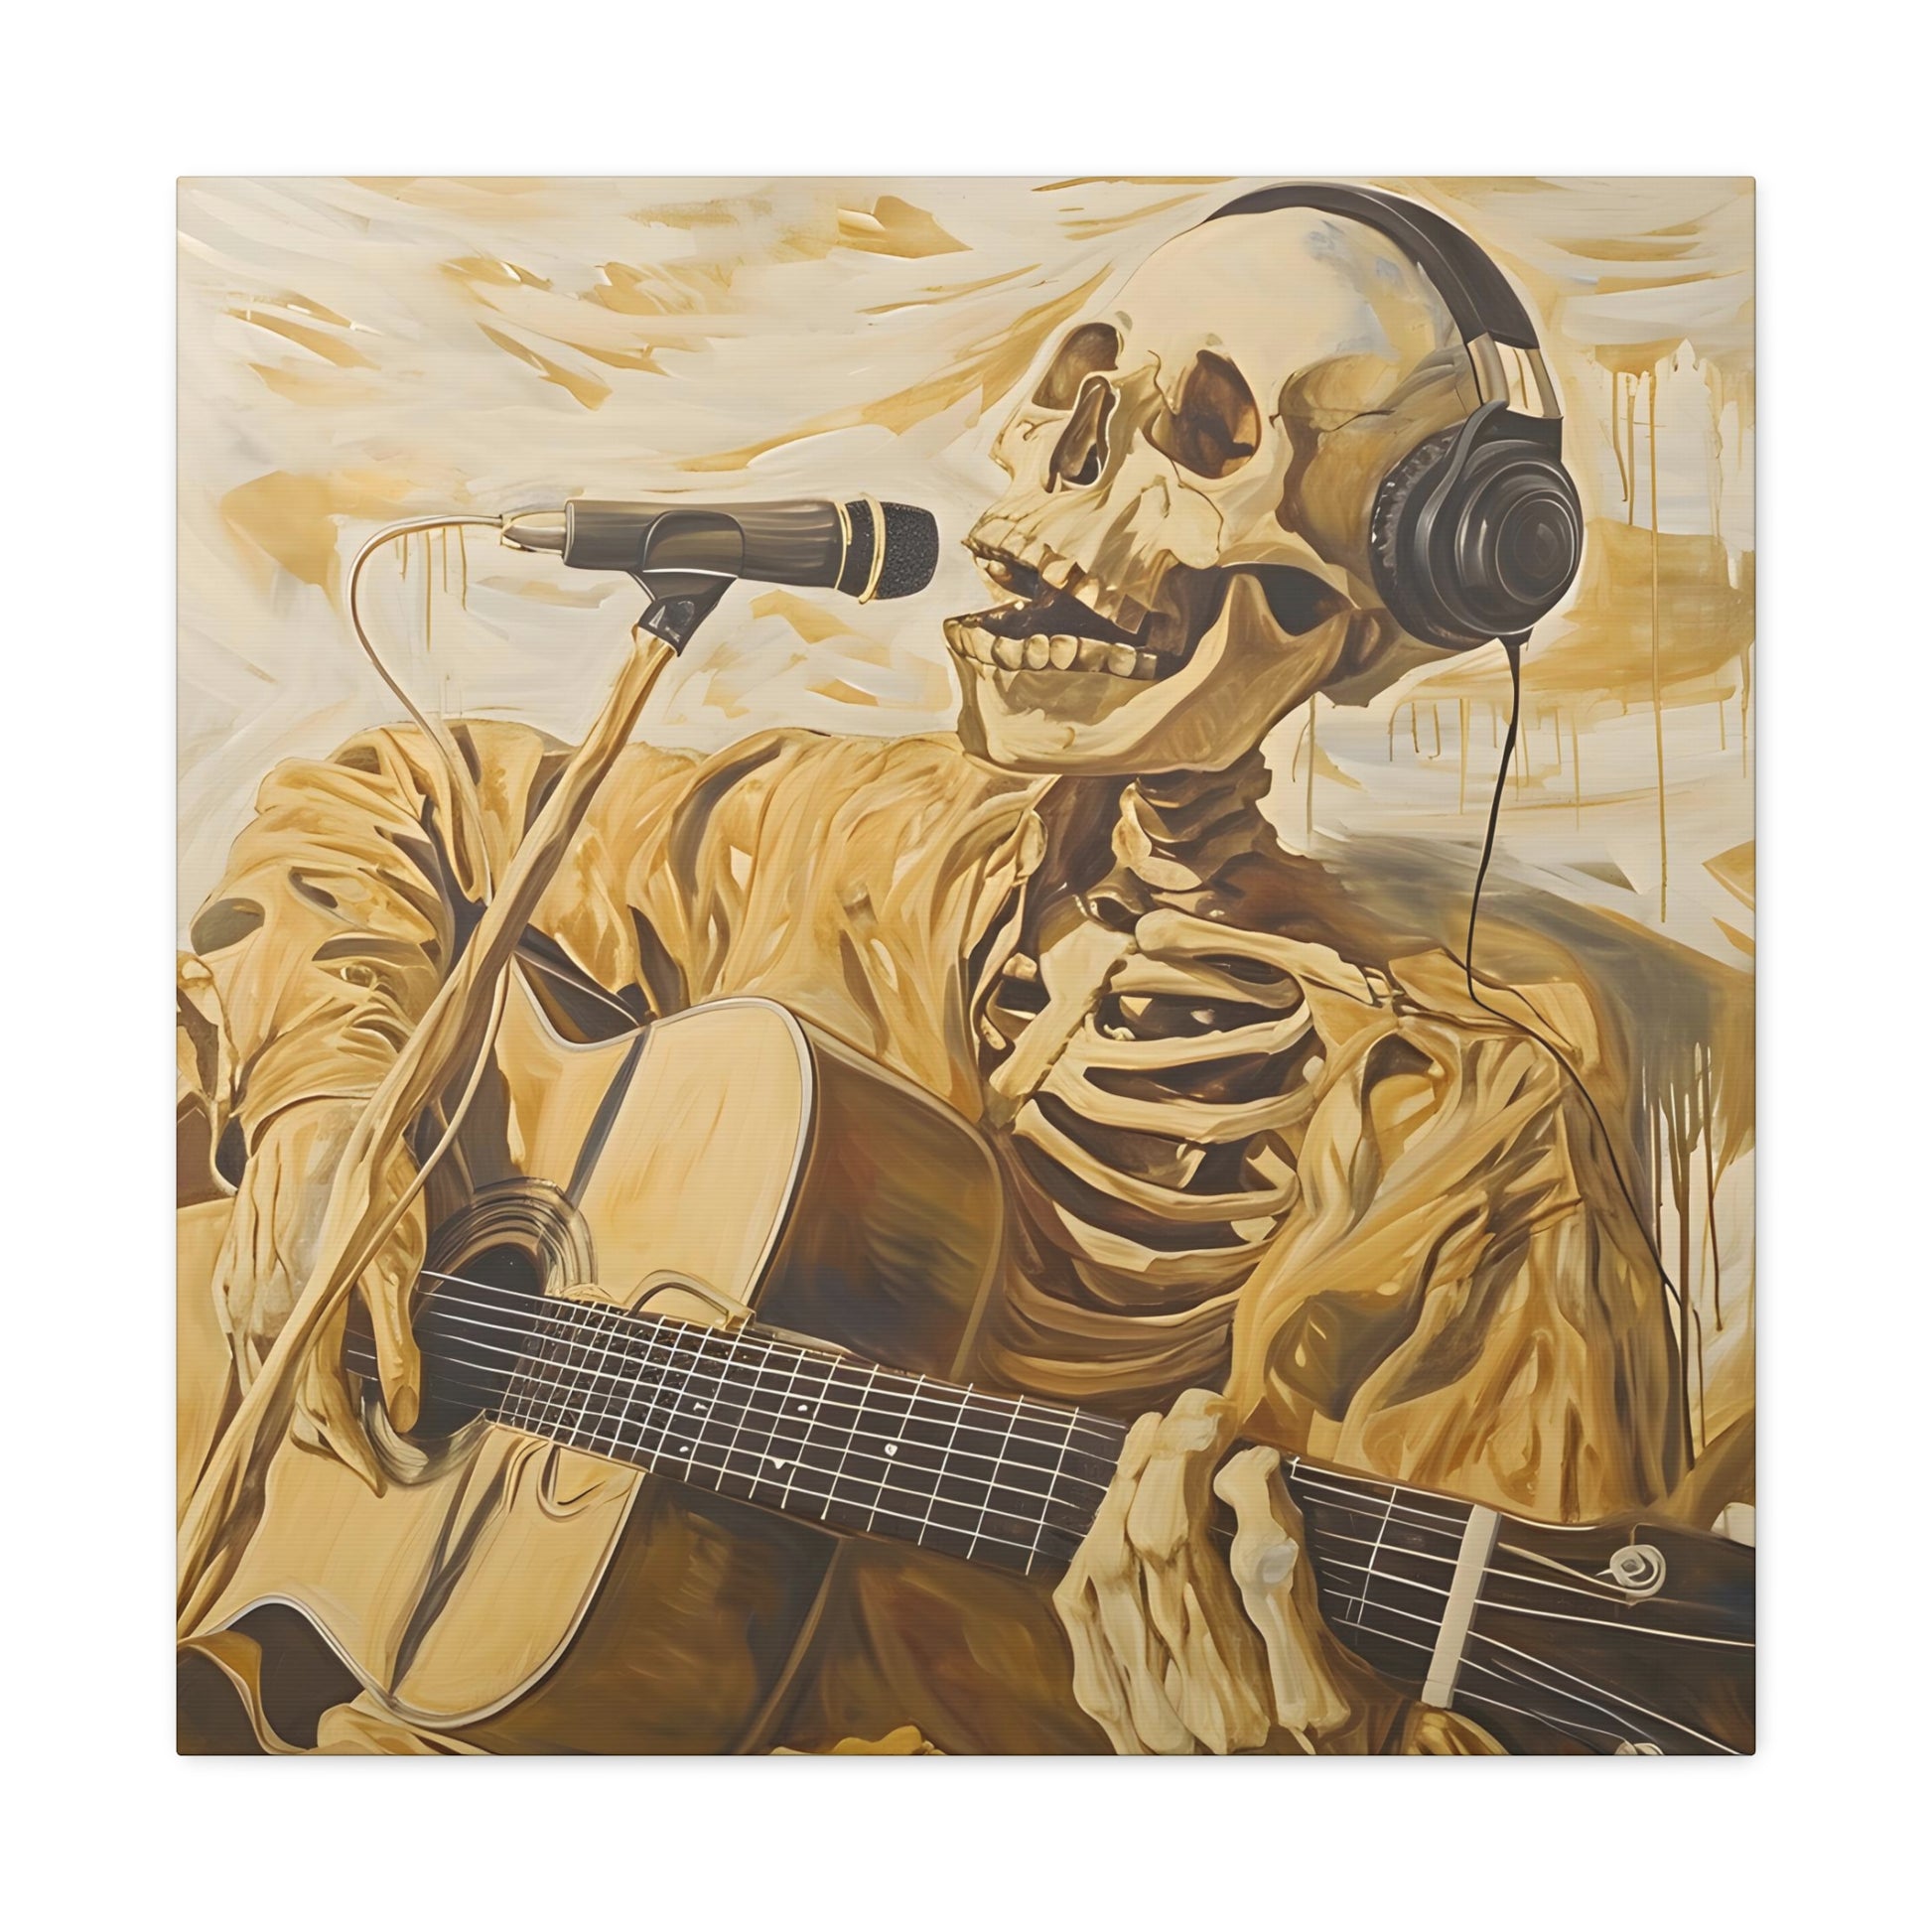 depicting a skeleton singing into a microphone, embodying music's redemptive power, inspired by 'American Pie' lyrics, with golden tones symbolizing music's sanctity